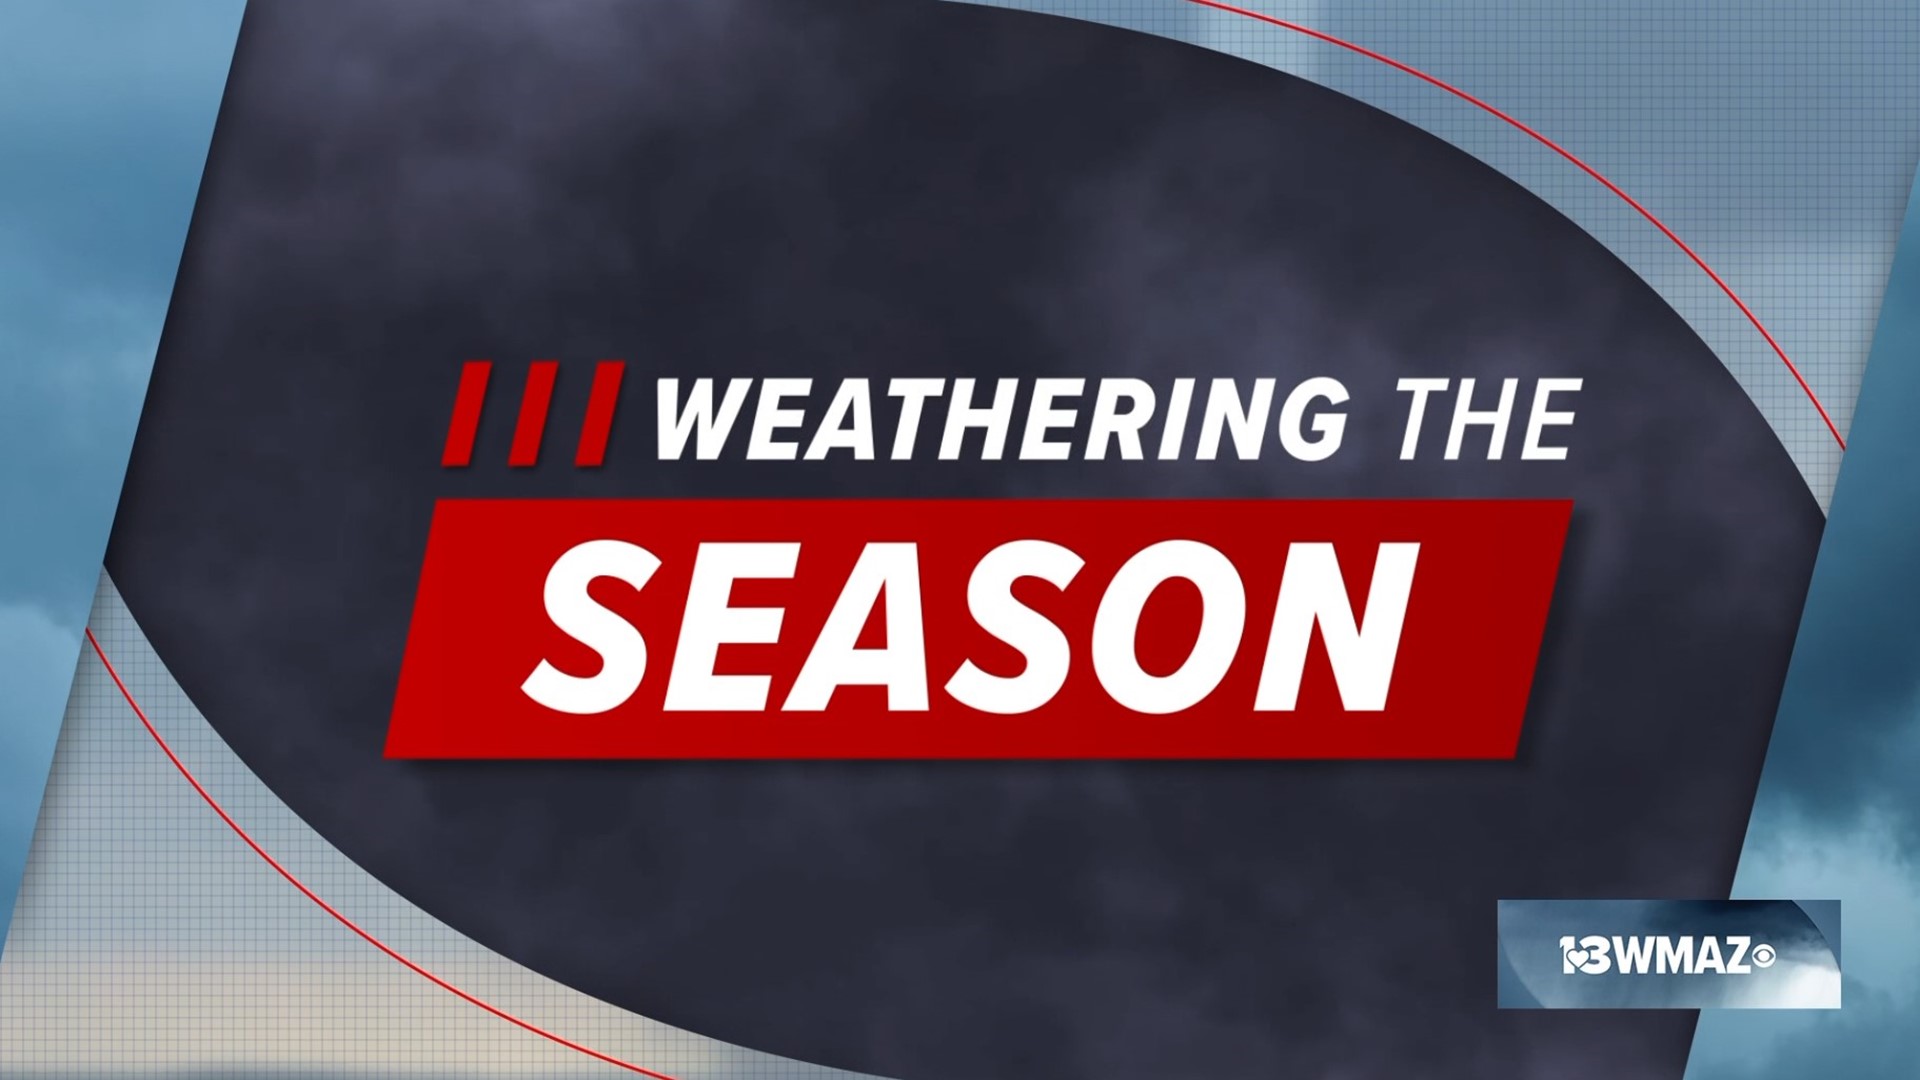 13WMAZ's Weather Team is getting you prepared to weather the severe storm season—along with help from emergency management offices. Here's how to stay weather aware